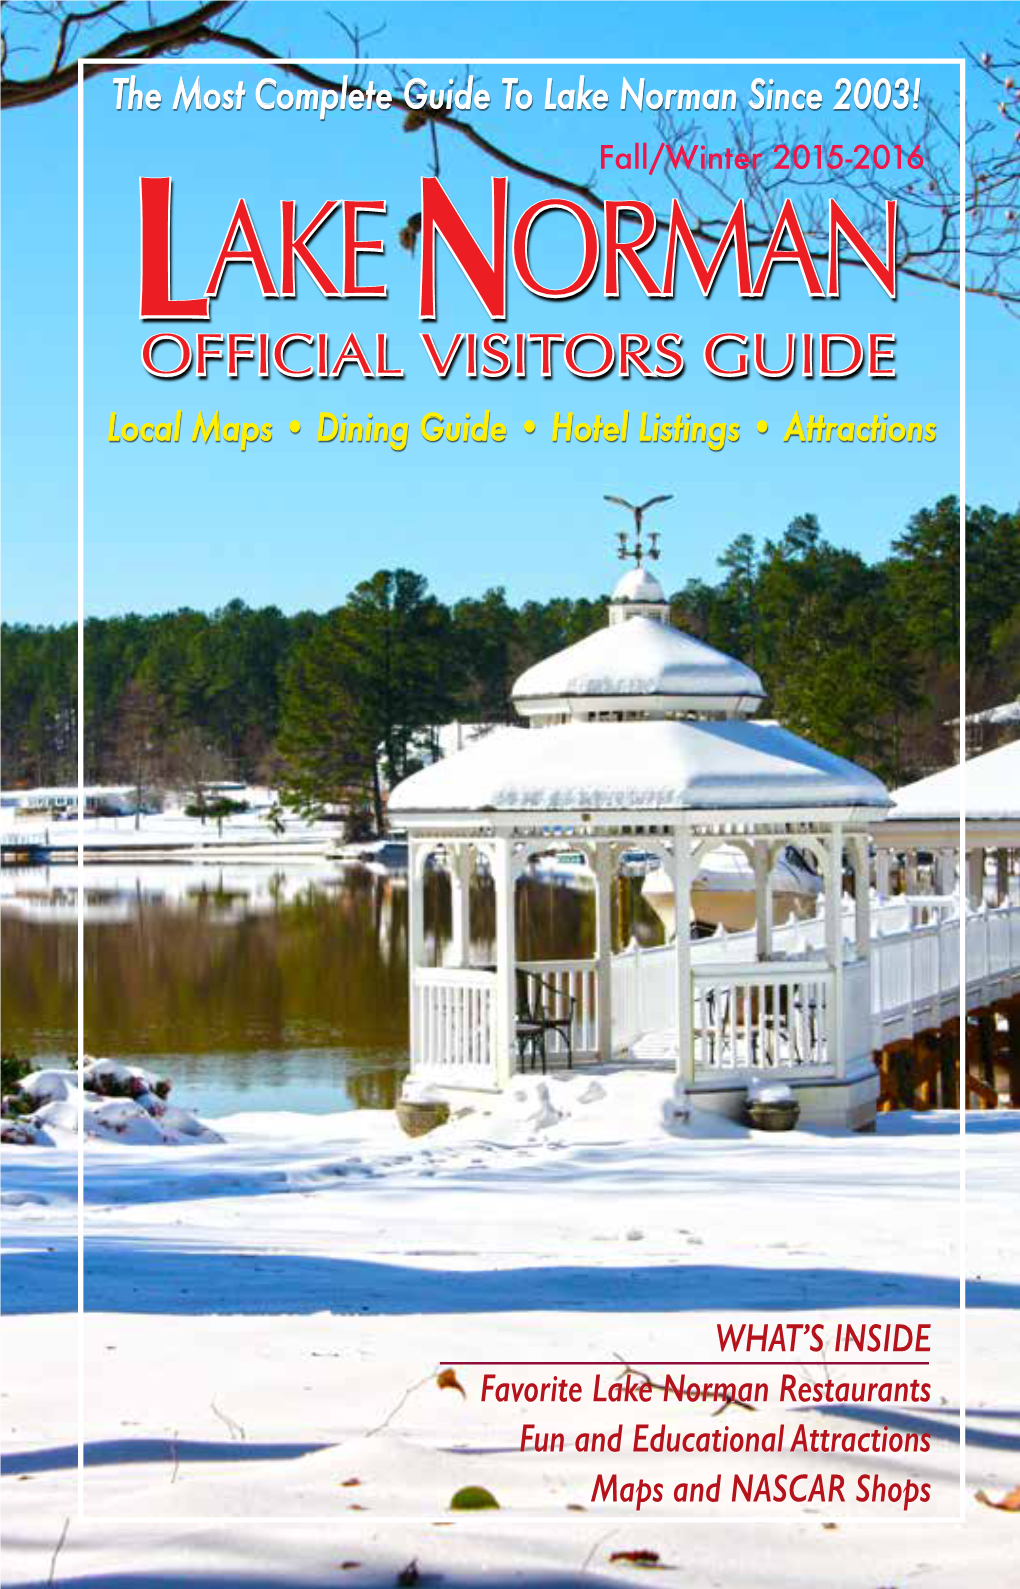 The Most Complete Guide to Lake Norman Since 2003! Fall/Winter 2015-2016